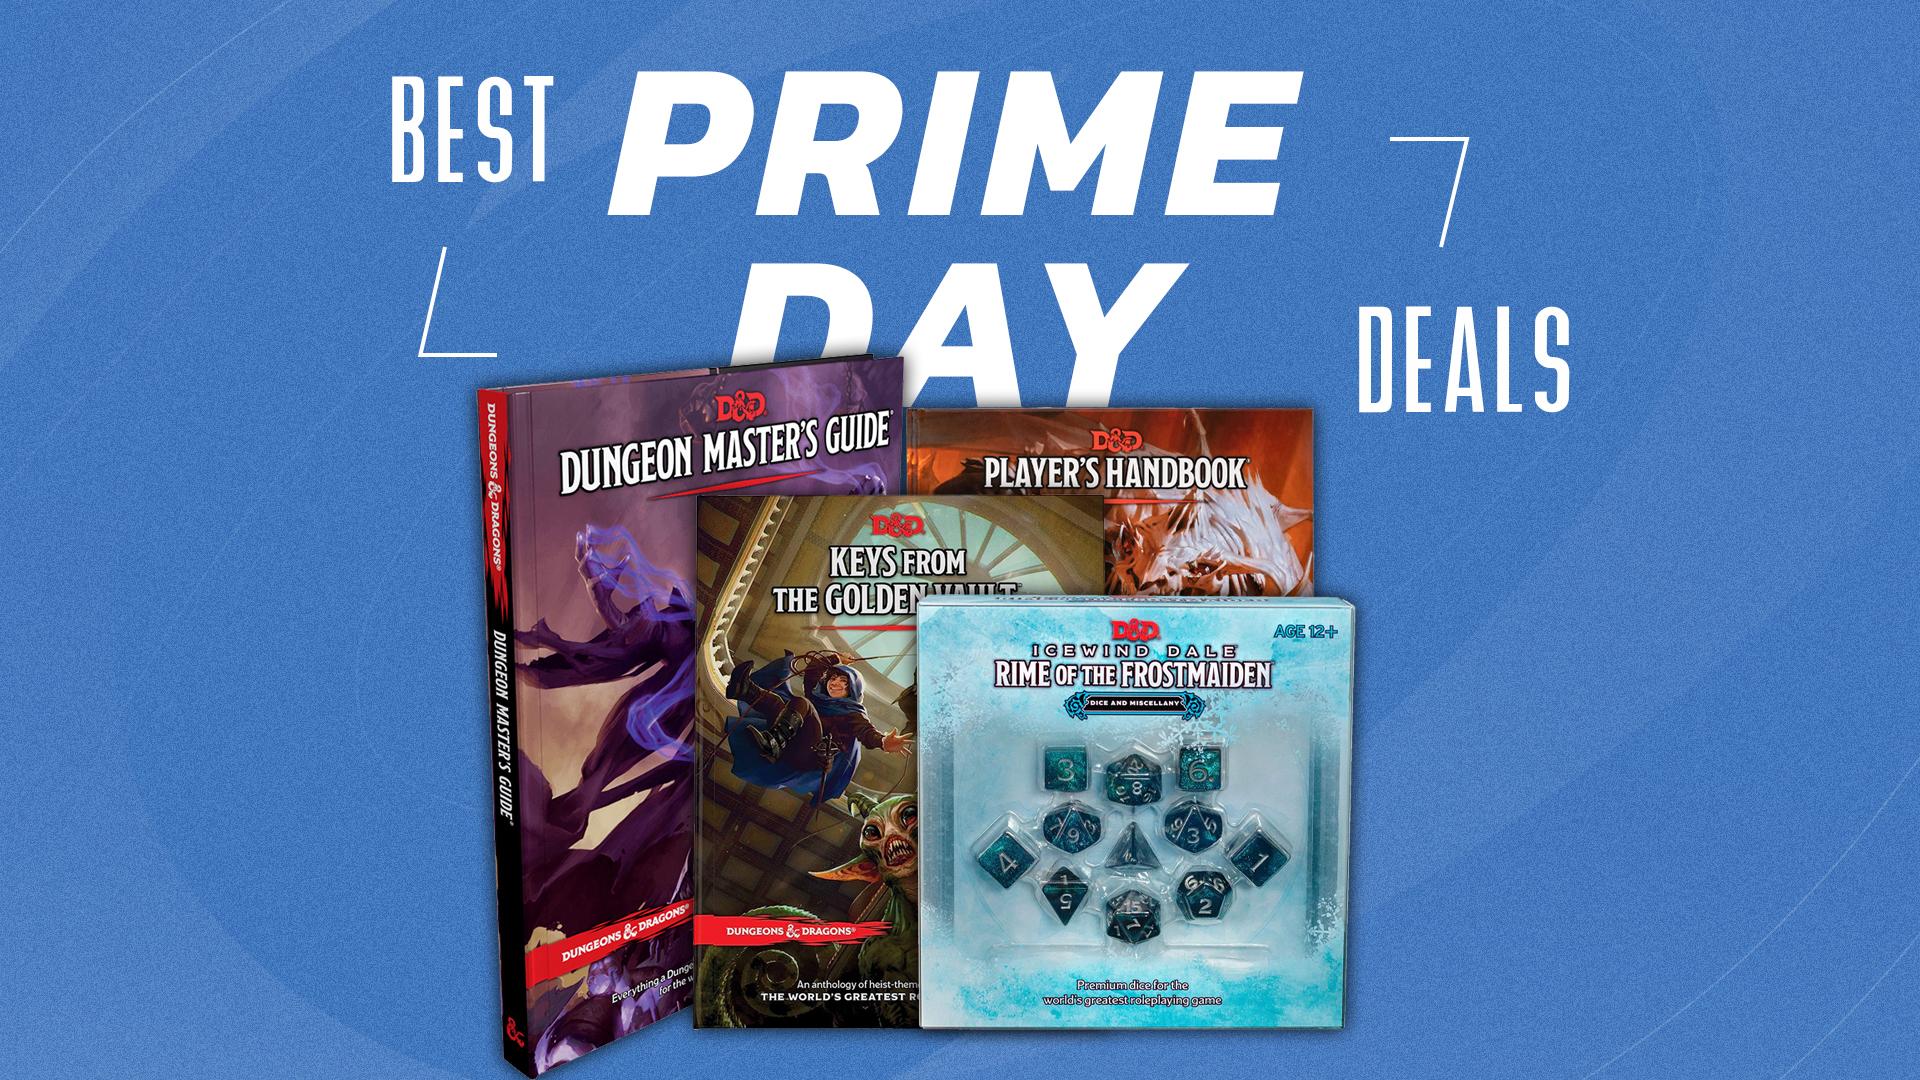 D&D prime day deals books and dice